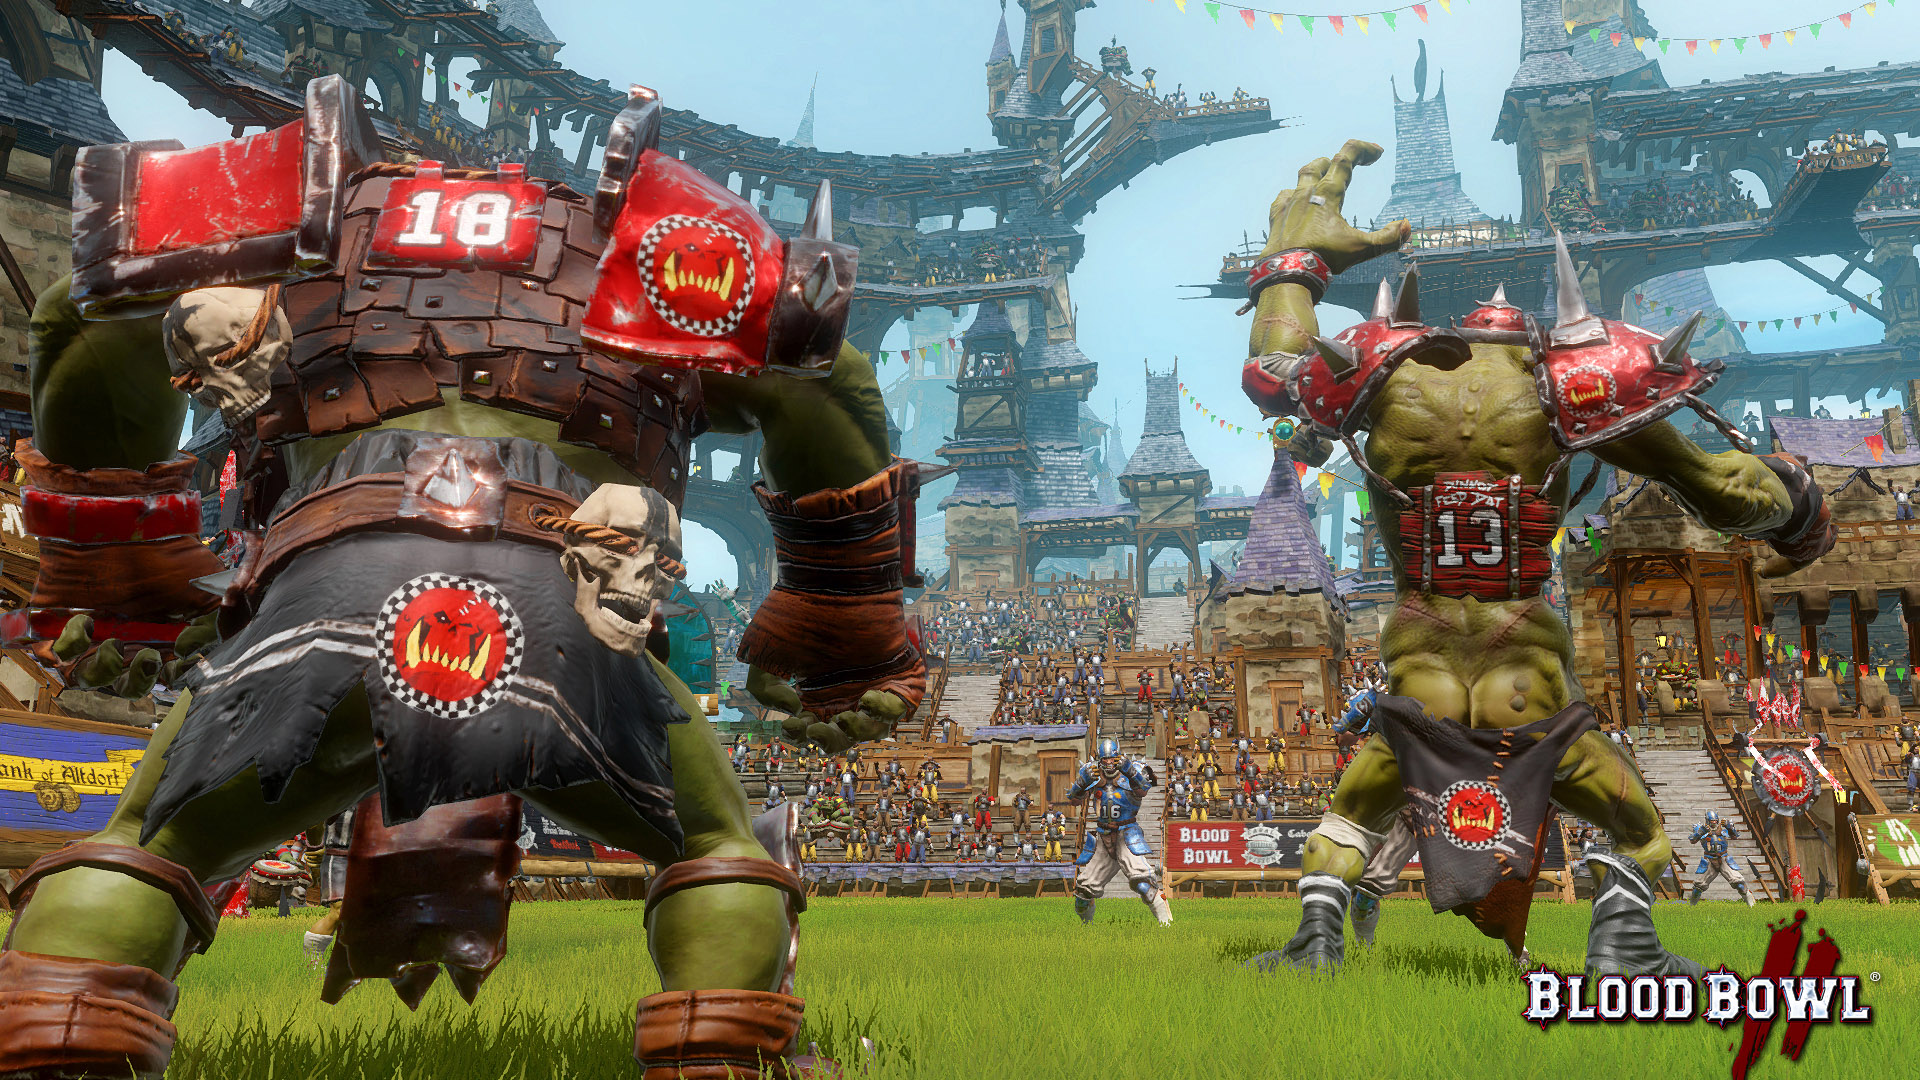 Save 85% on Blood Bowl 2 on Steam